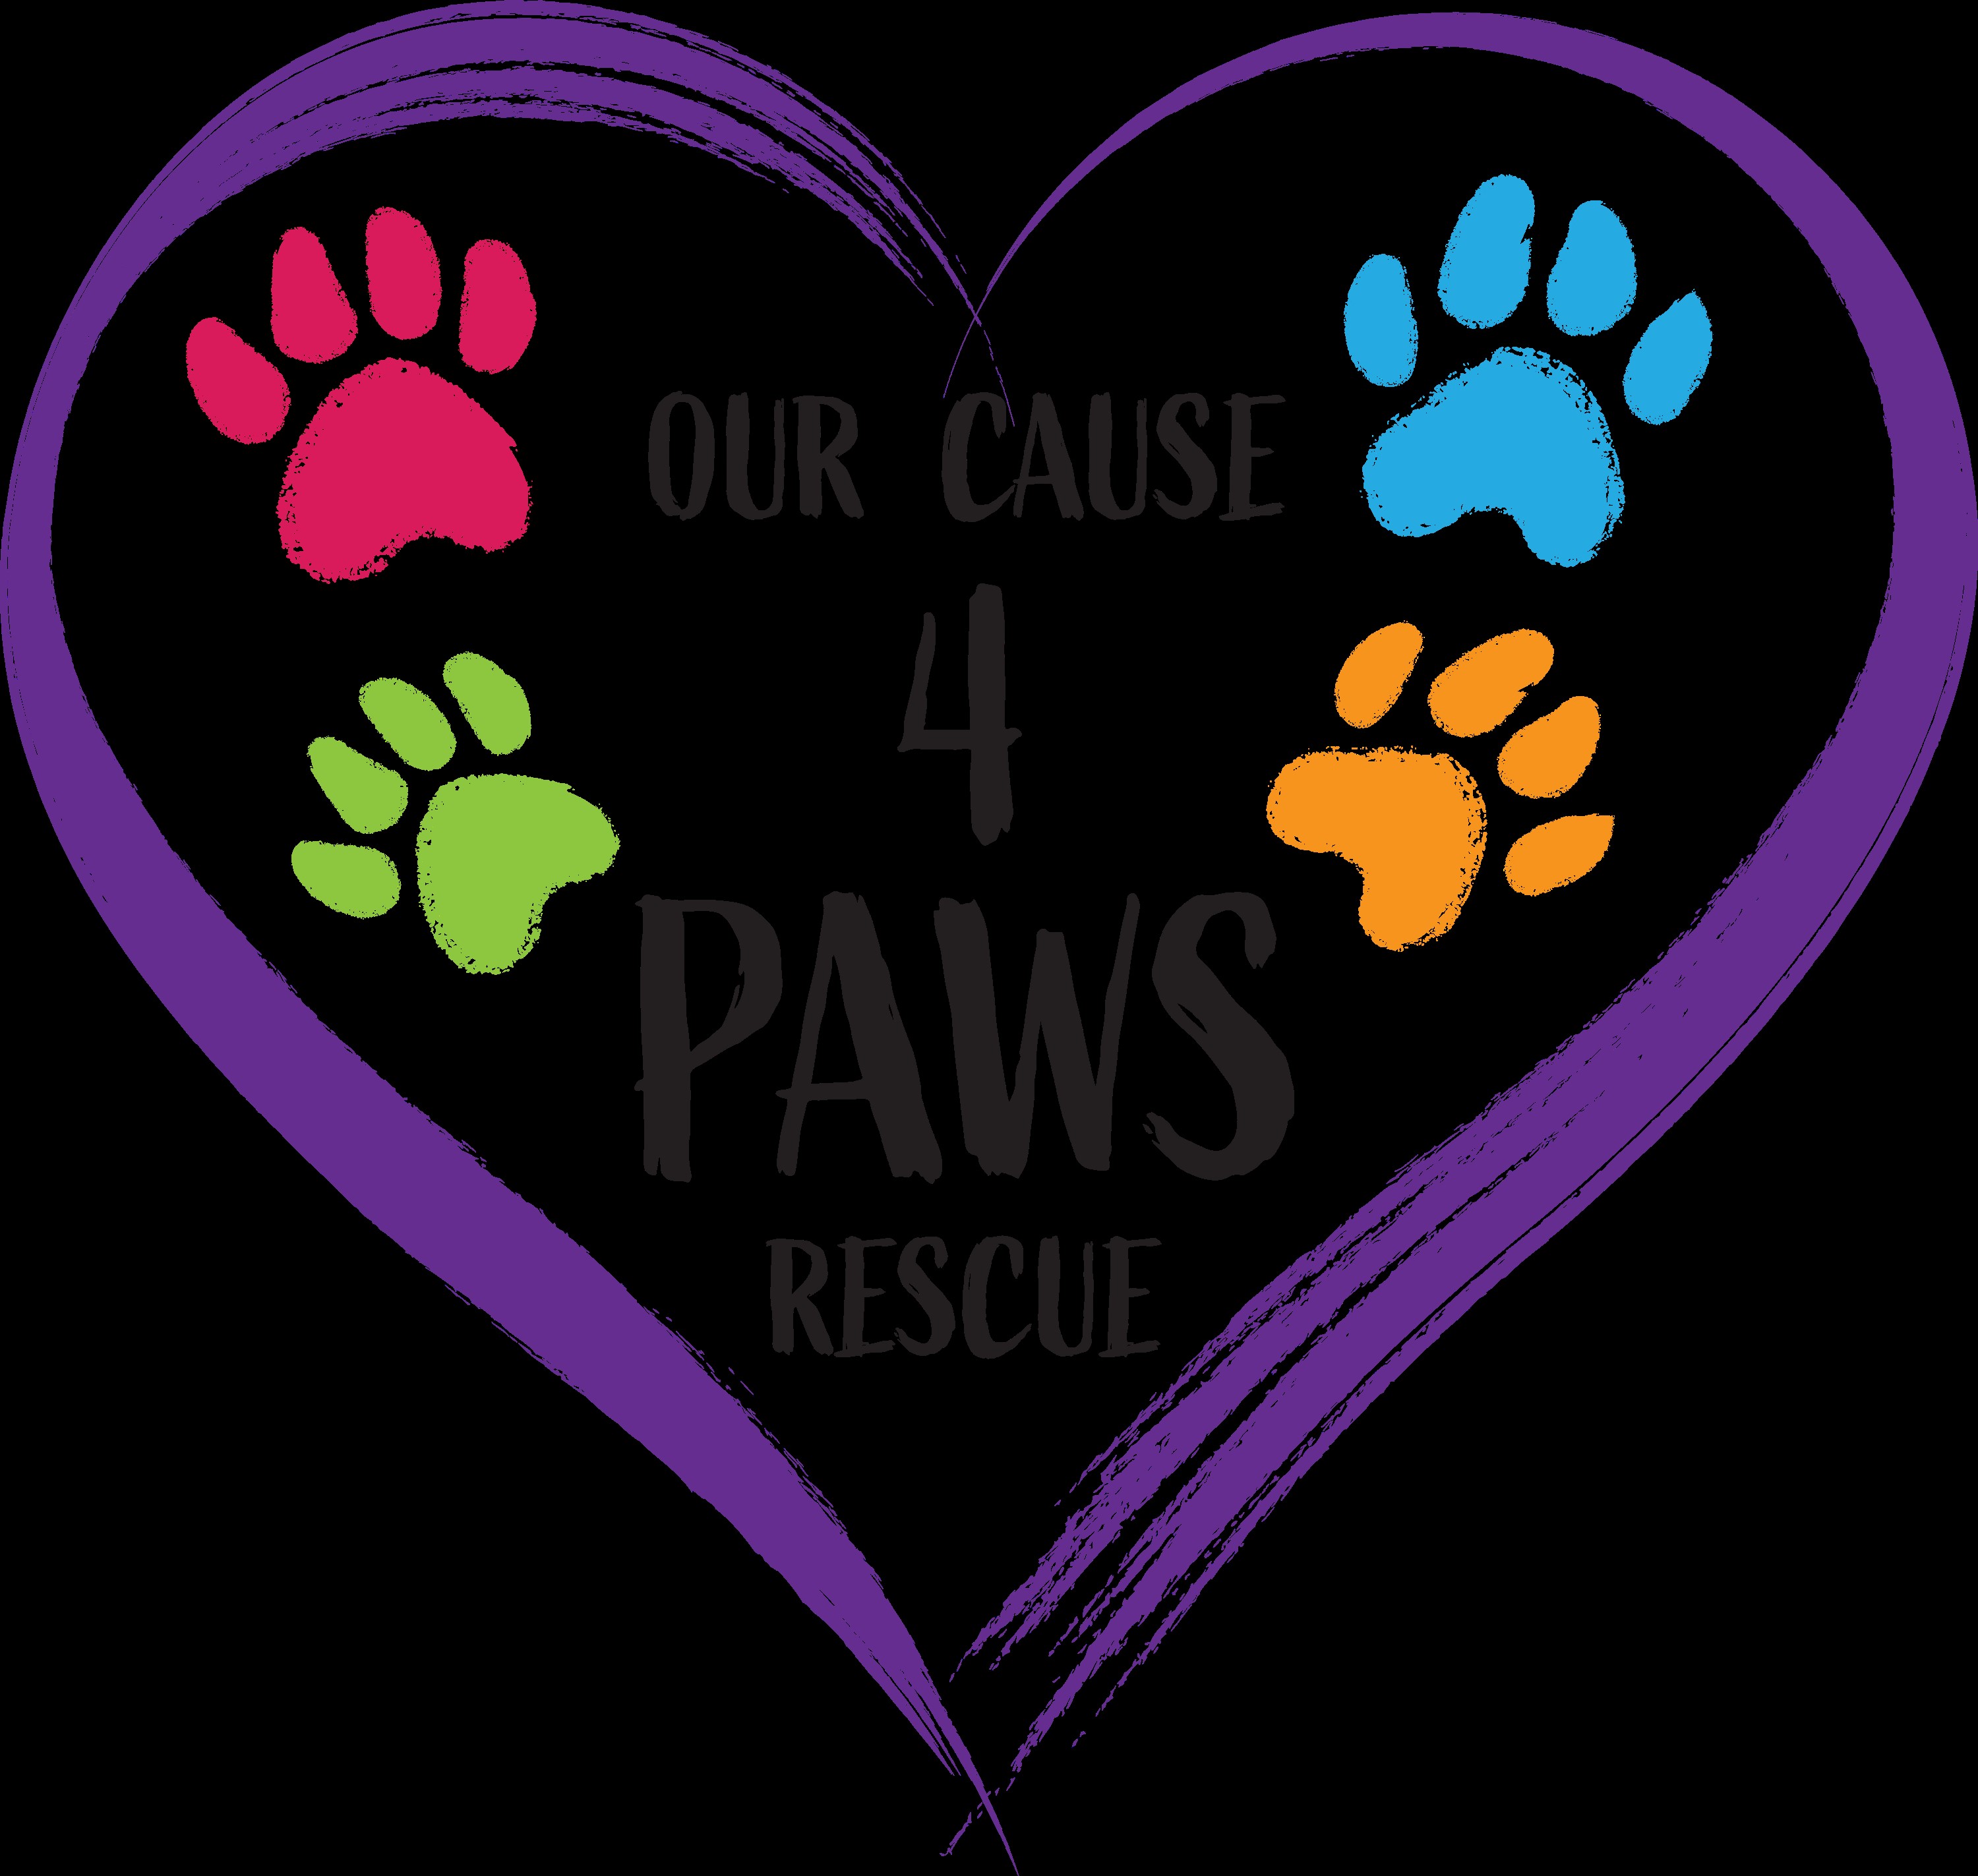 Our Cause 4 Paws Rescue